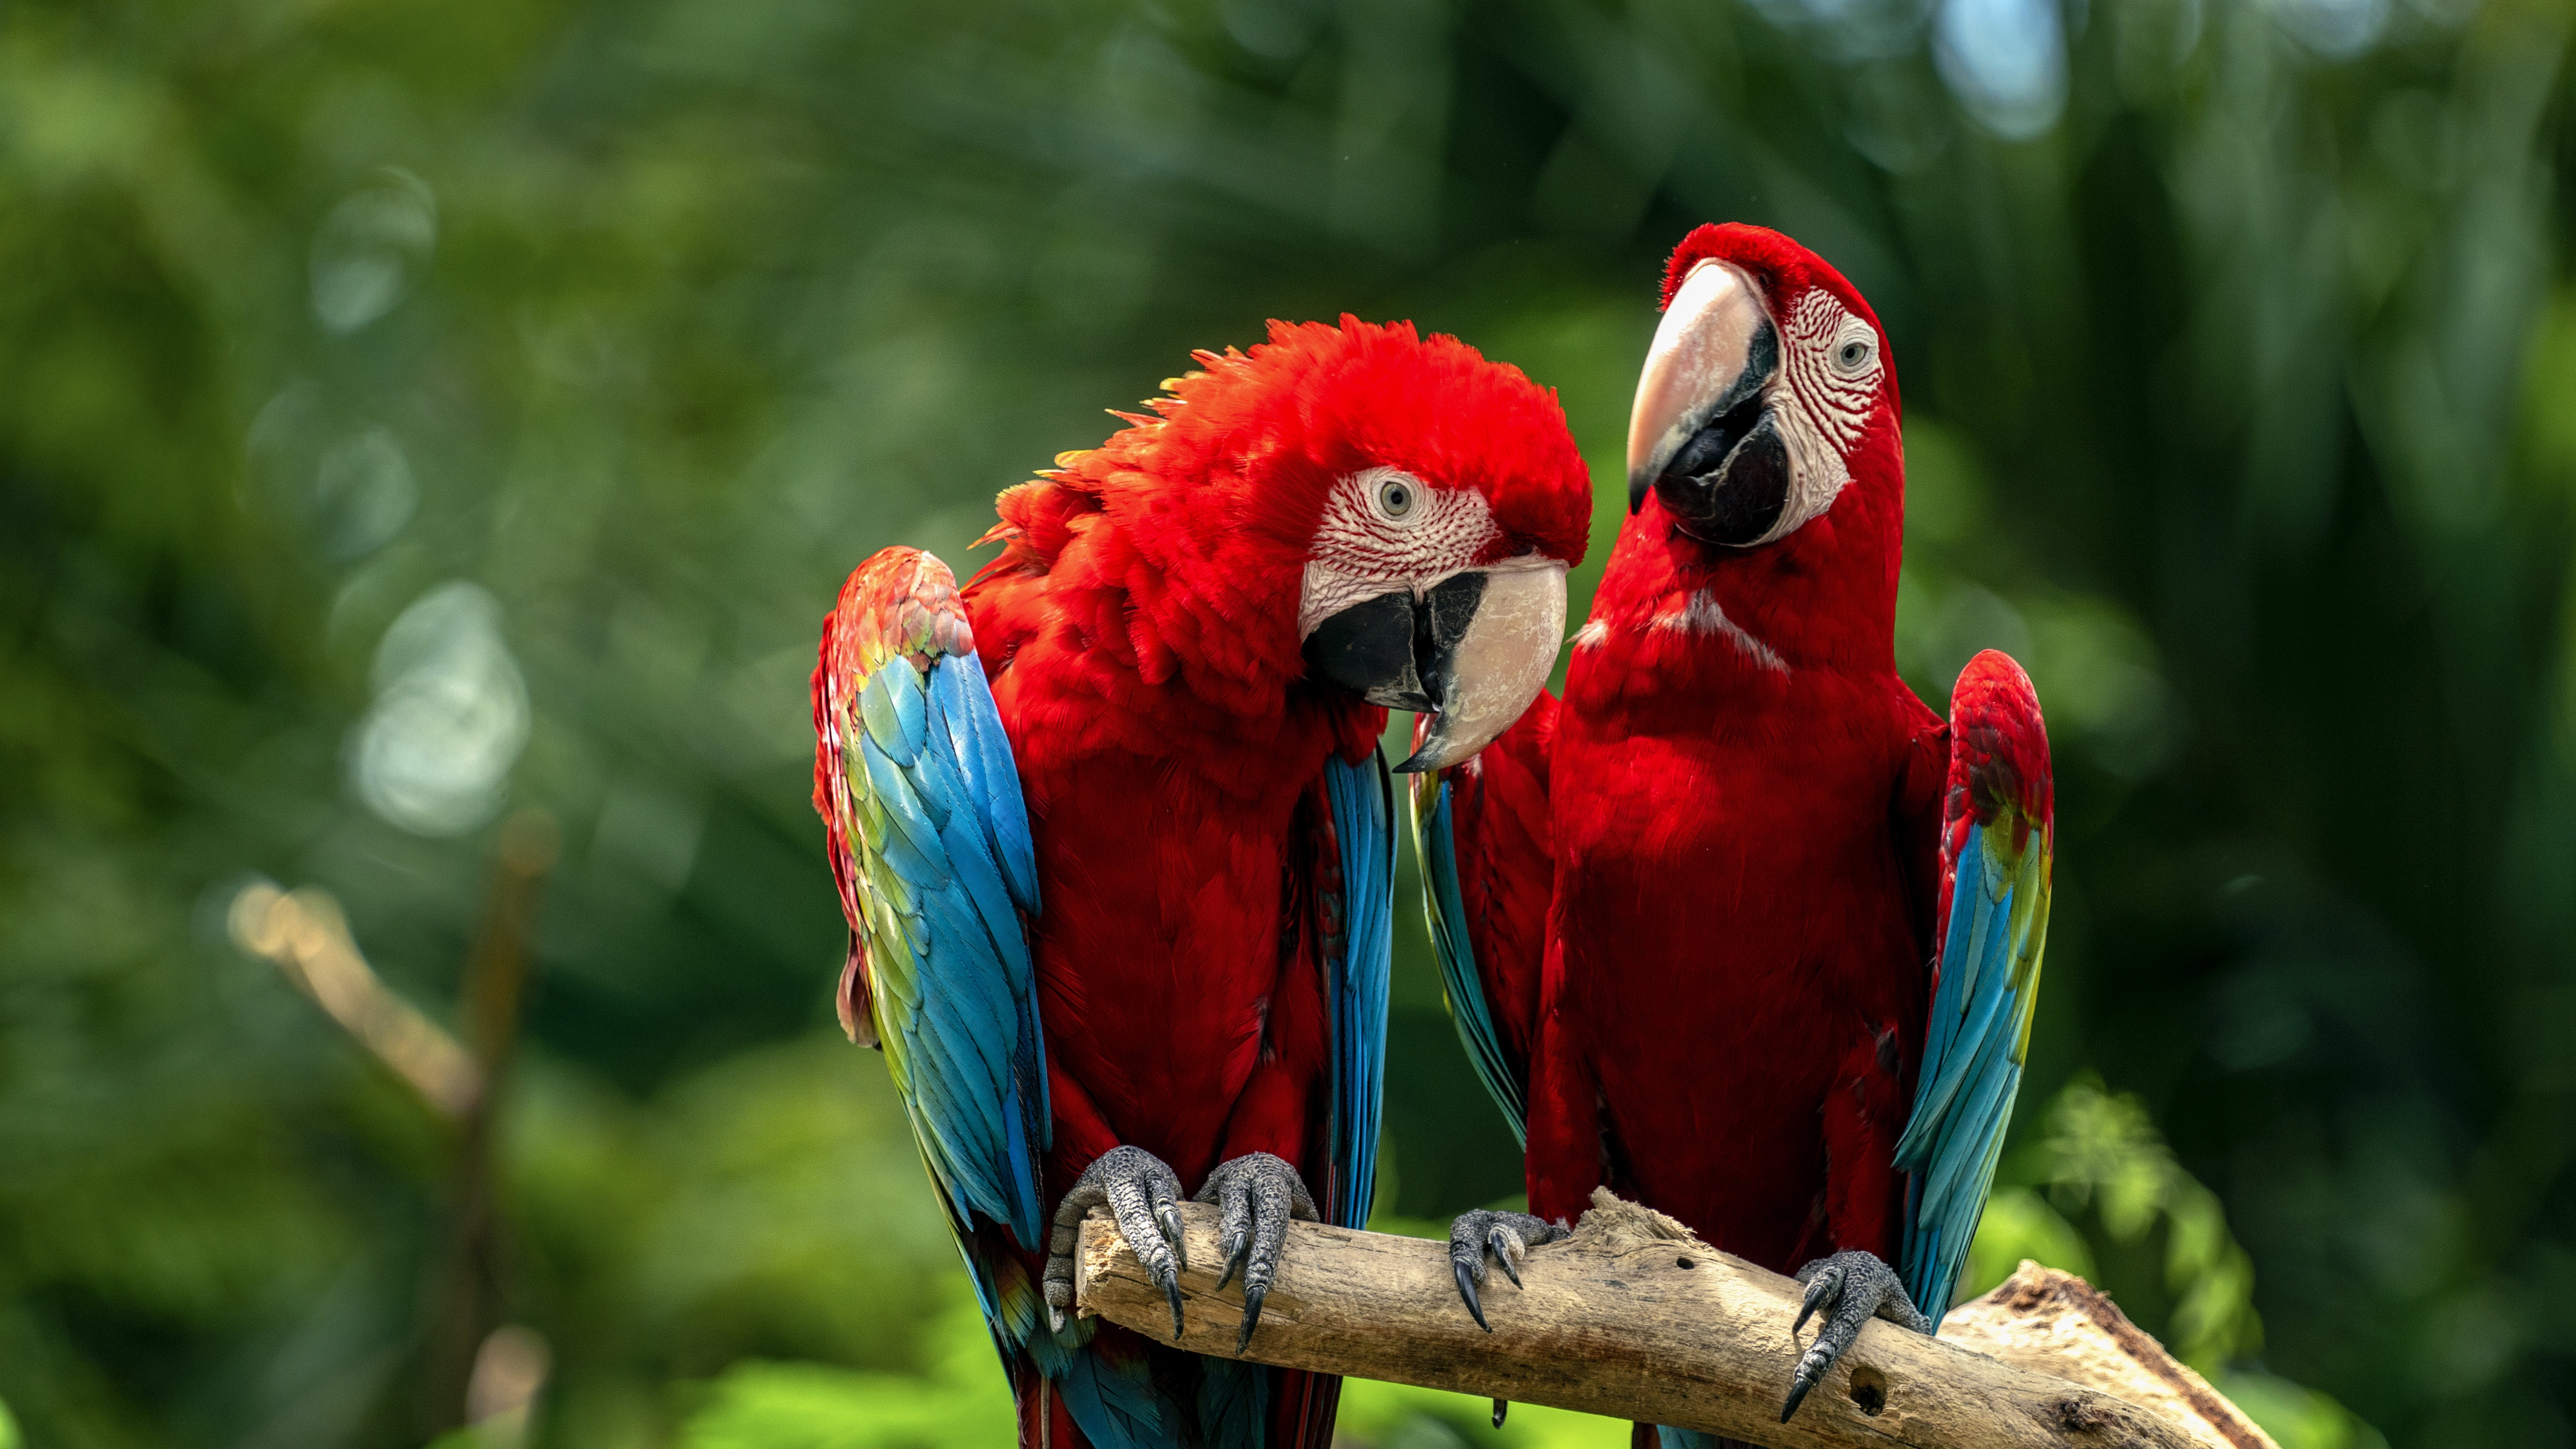 Macaw birds Wallpaper 4K, Couple, Colorful, Animals, #7464